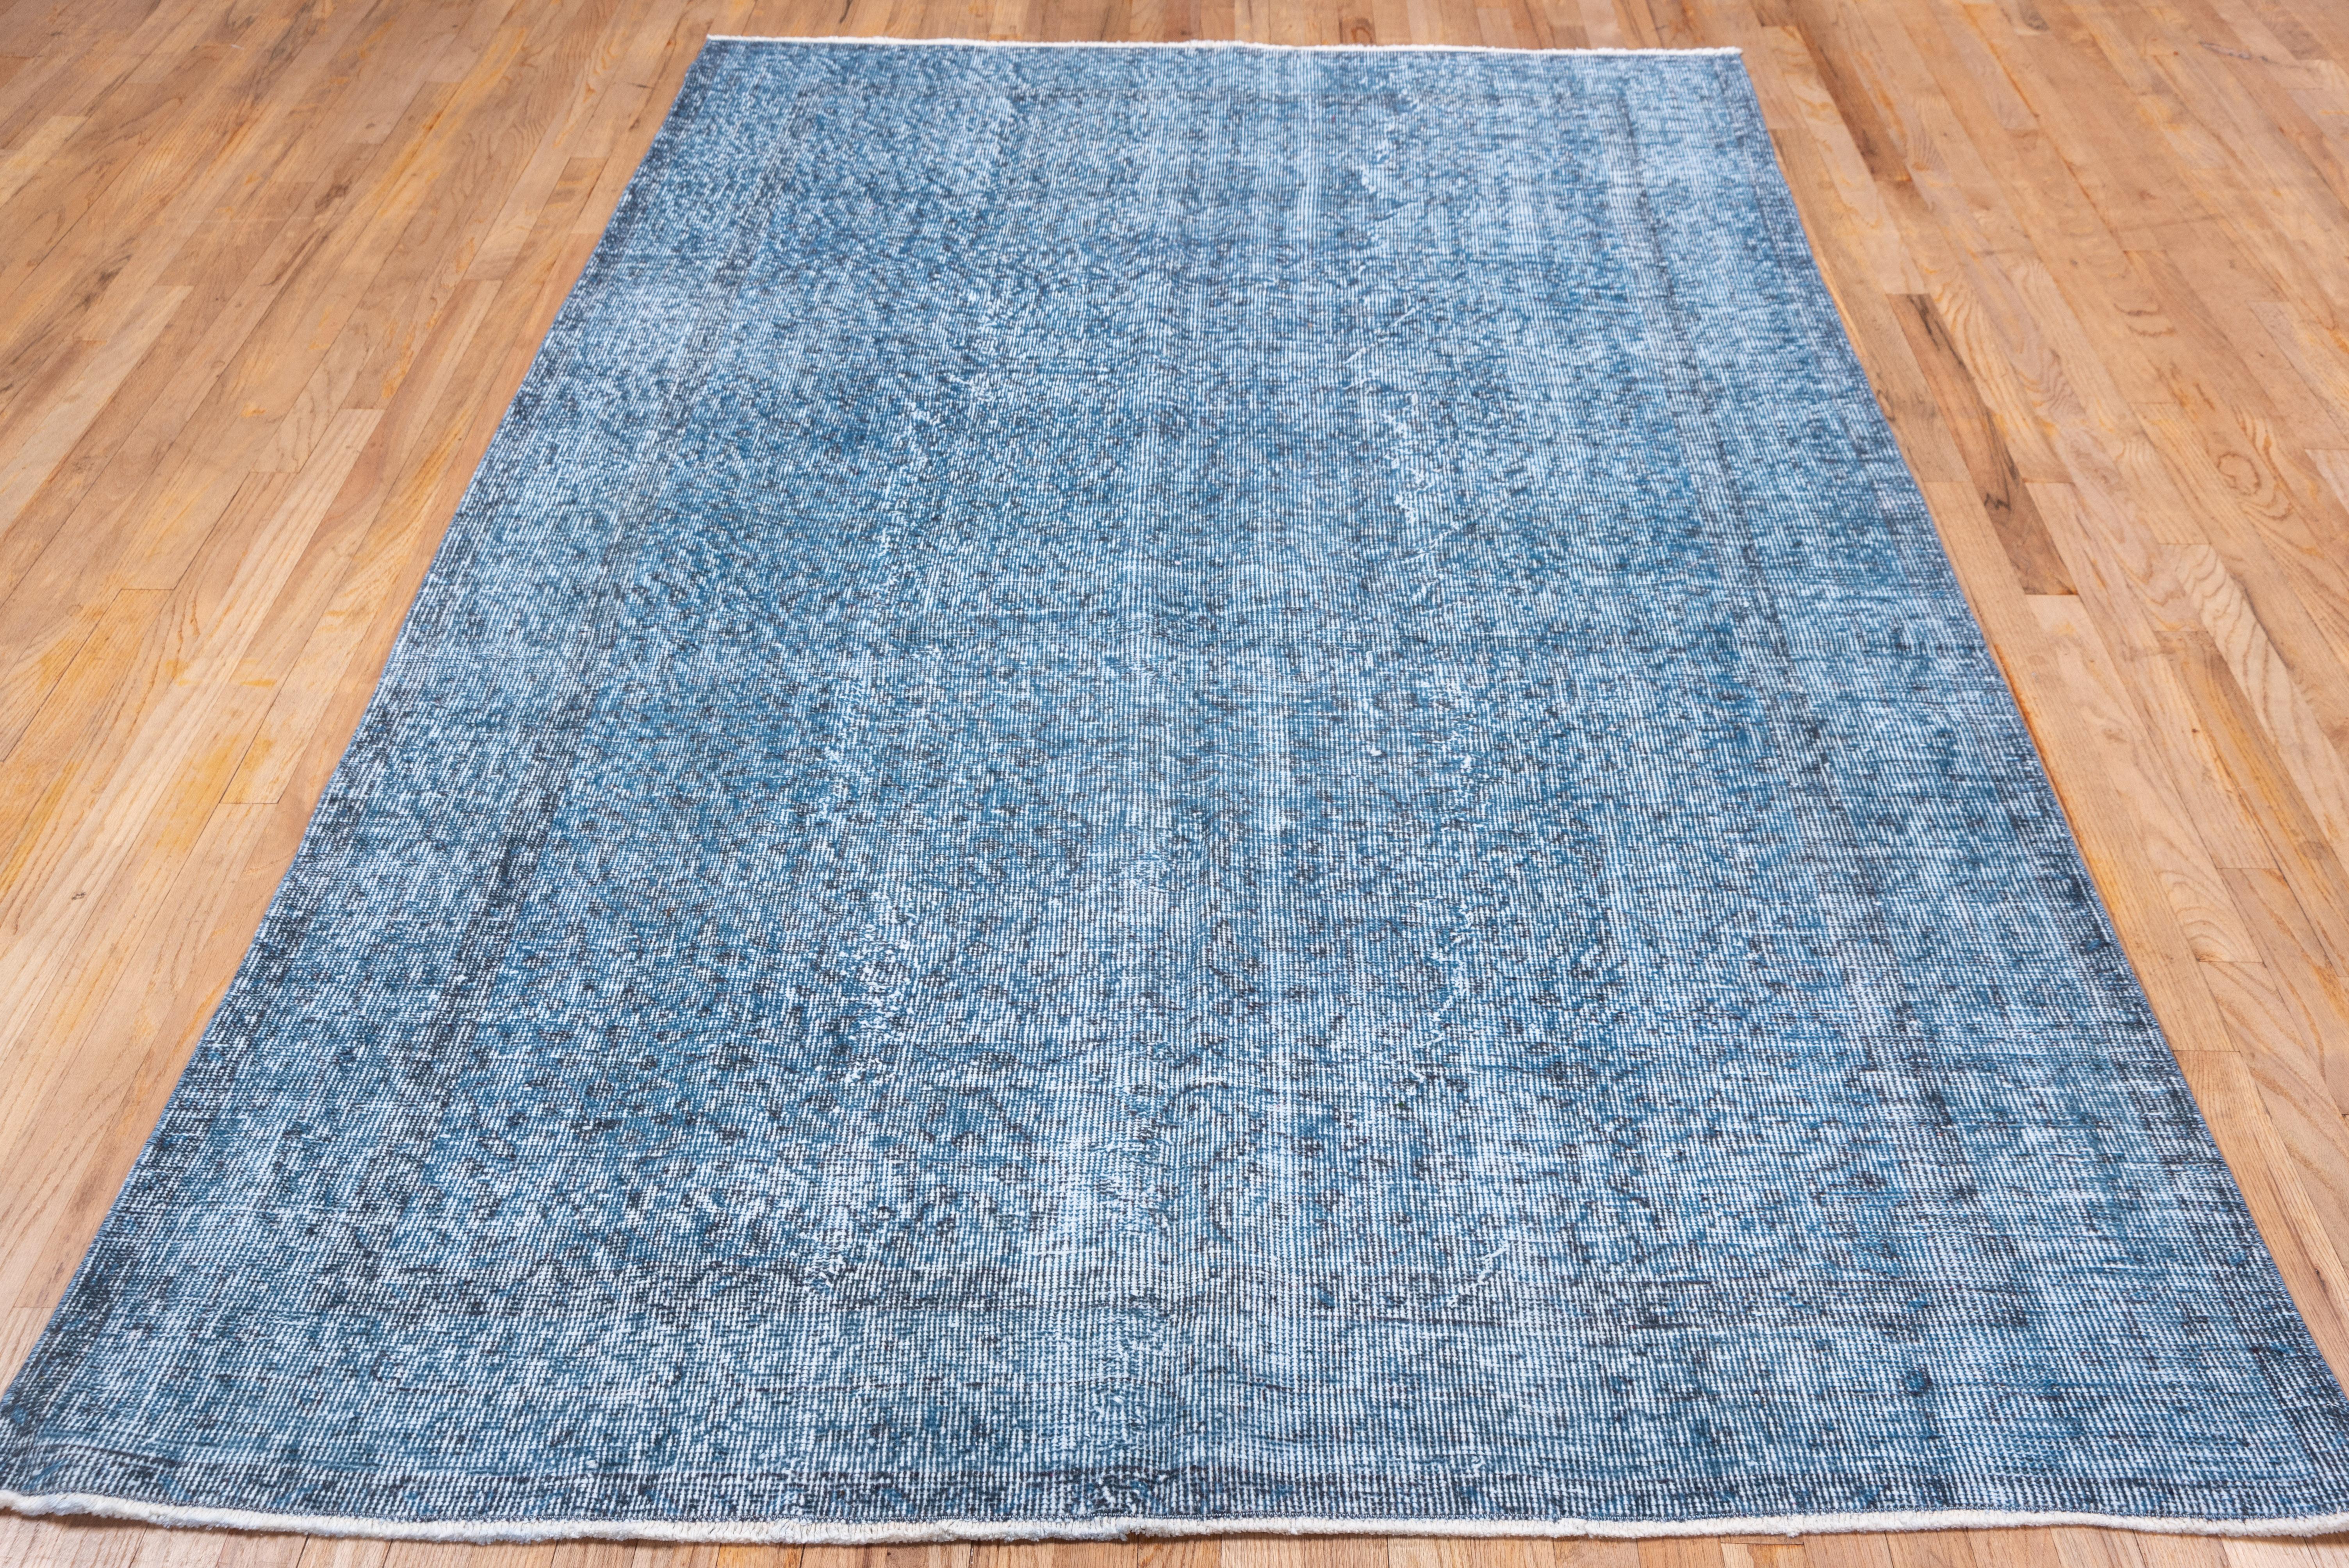 This bright blue Turkish overdye carpet has a pattern defined by the wear beyond the all-over general distress. Vertical and horizontal off white strips cross near the center. Shabby chic conditions and can offer some great texture for floor